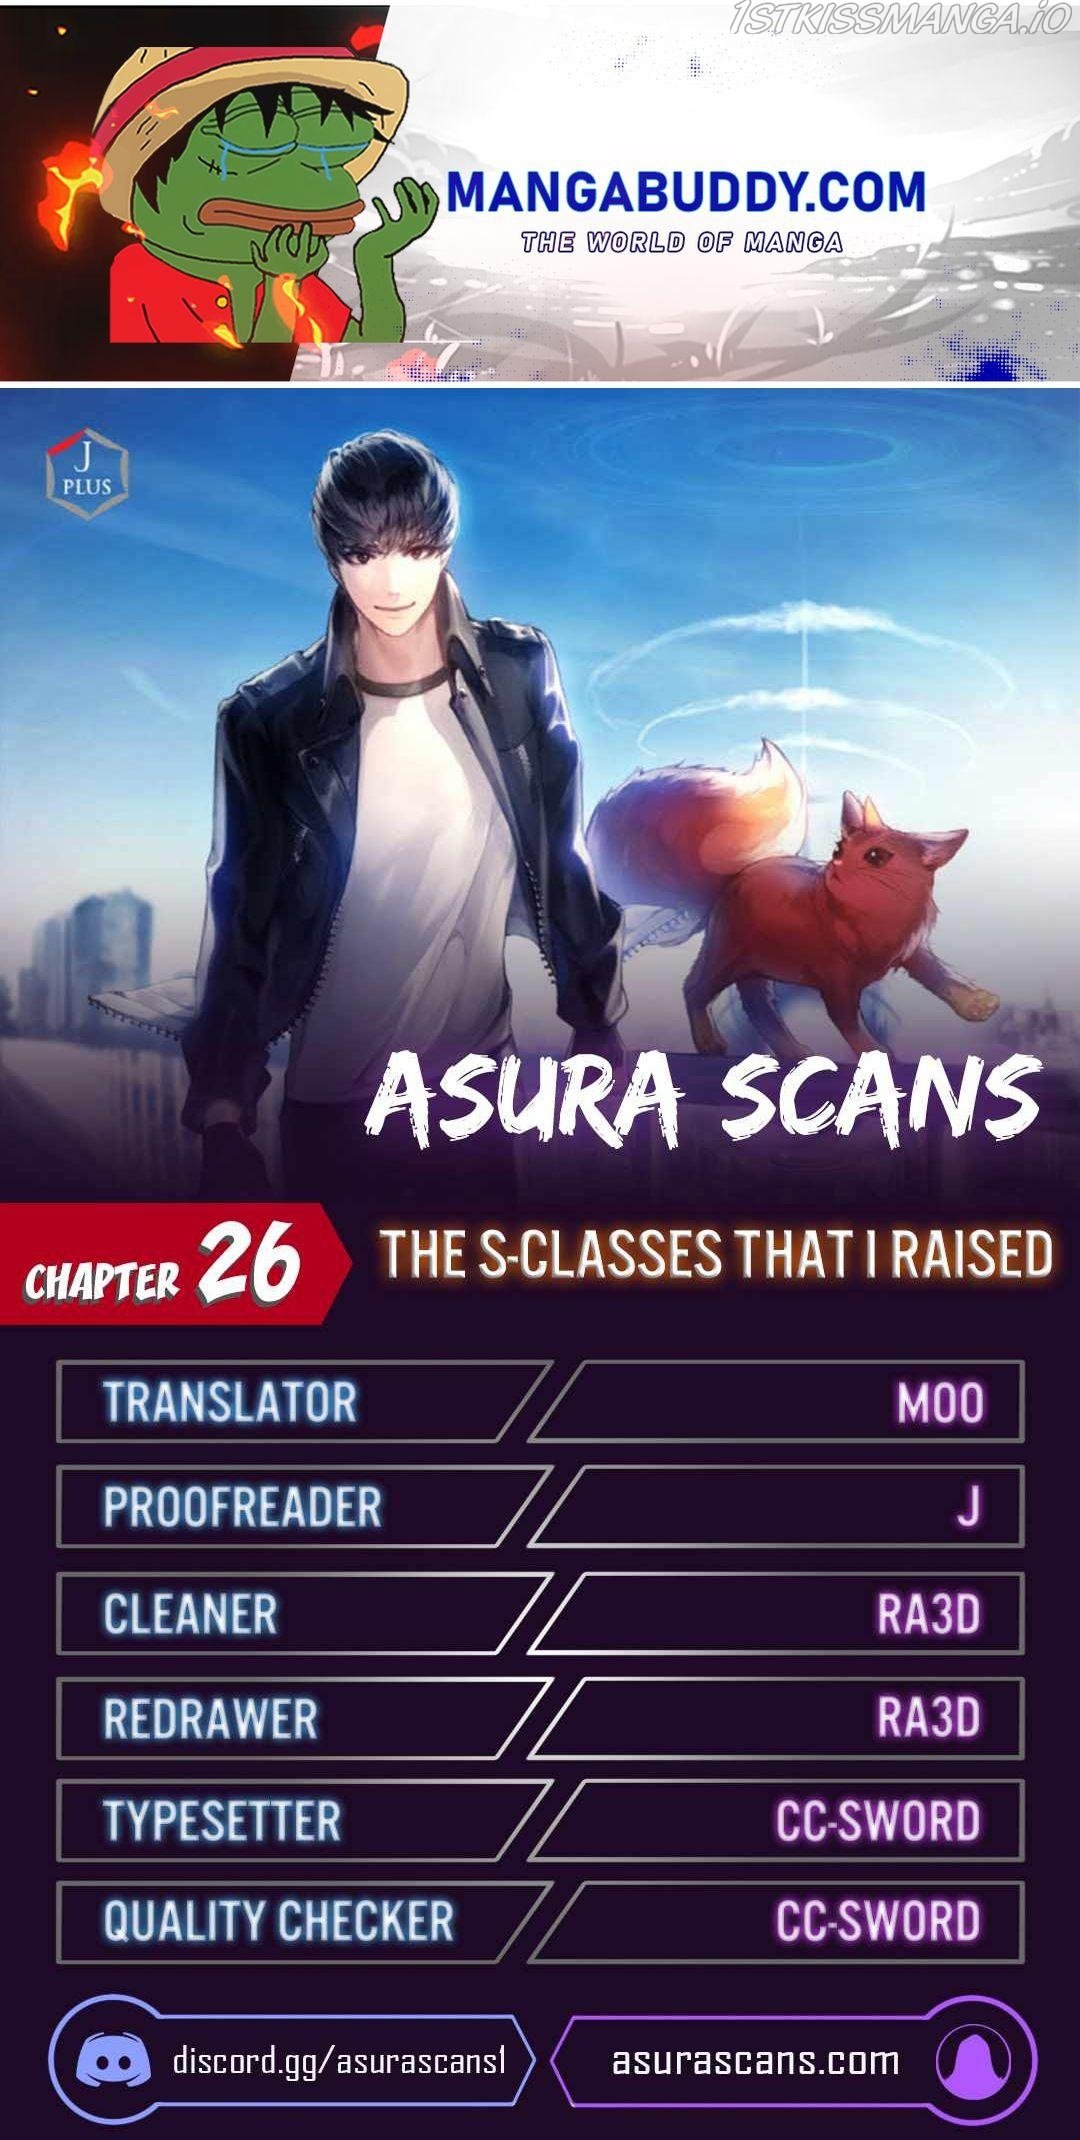 The S-Classes That I Raised chapter 26